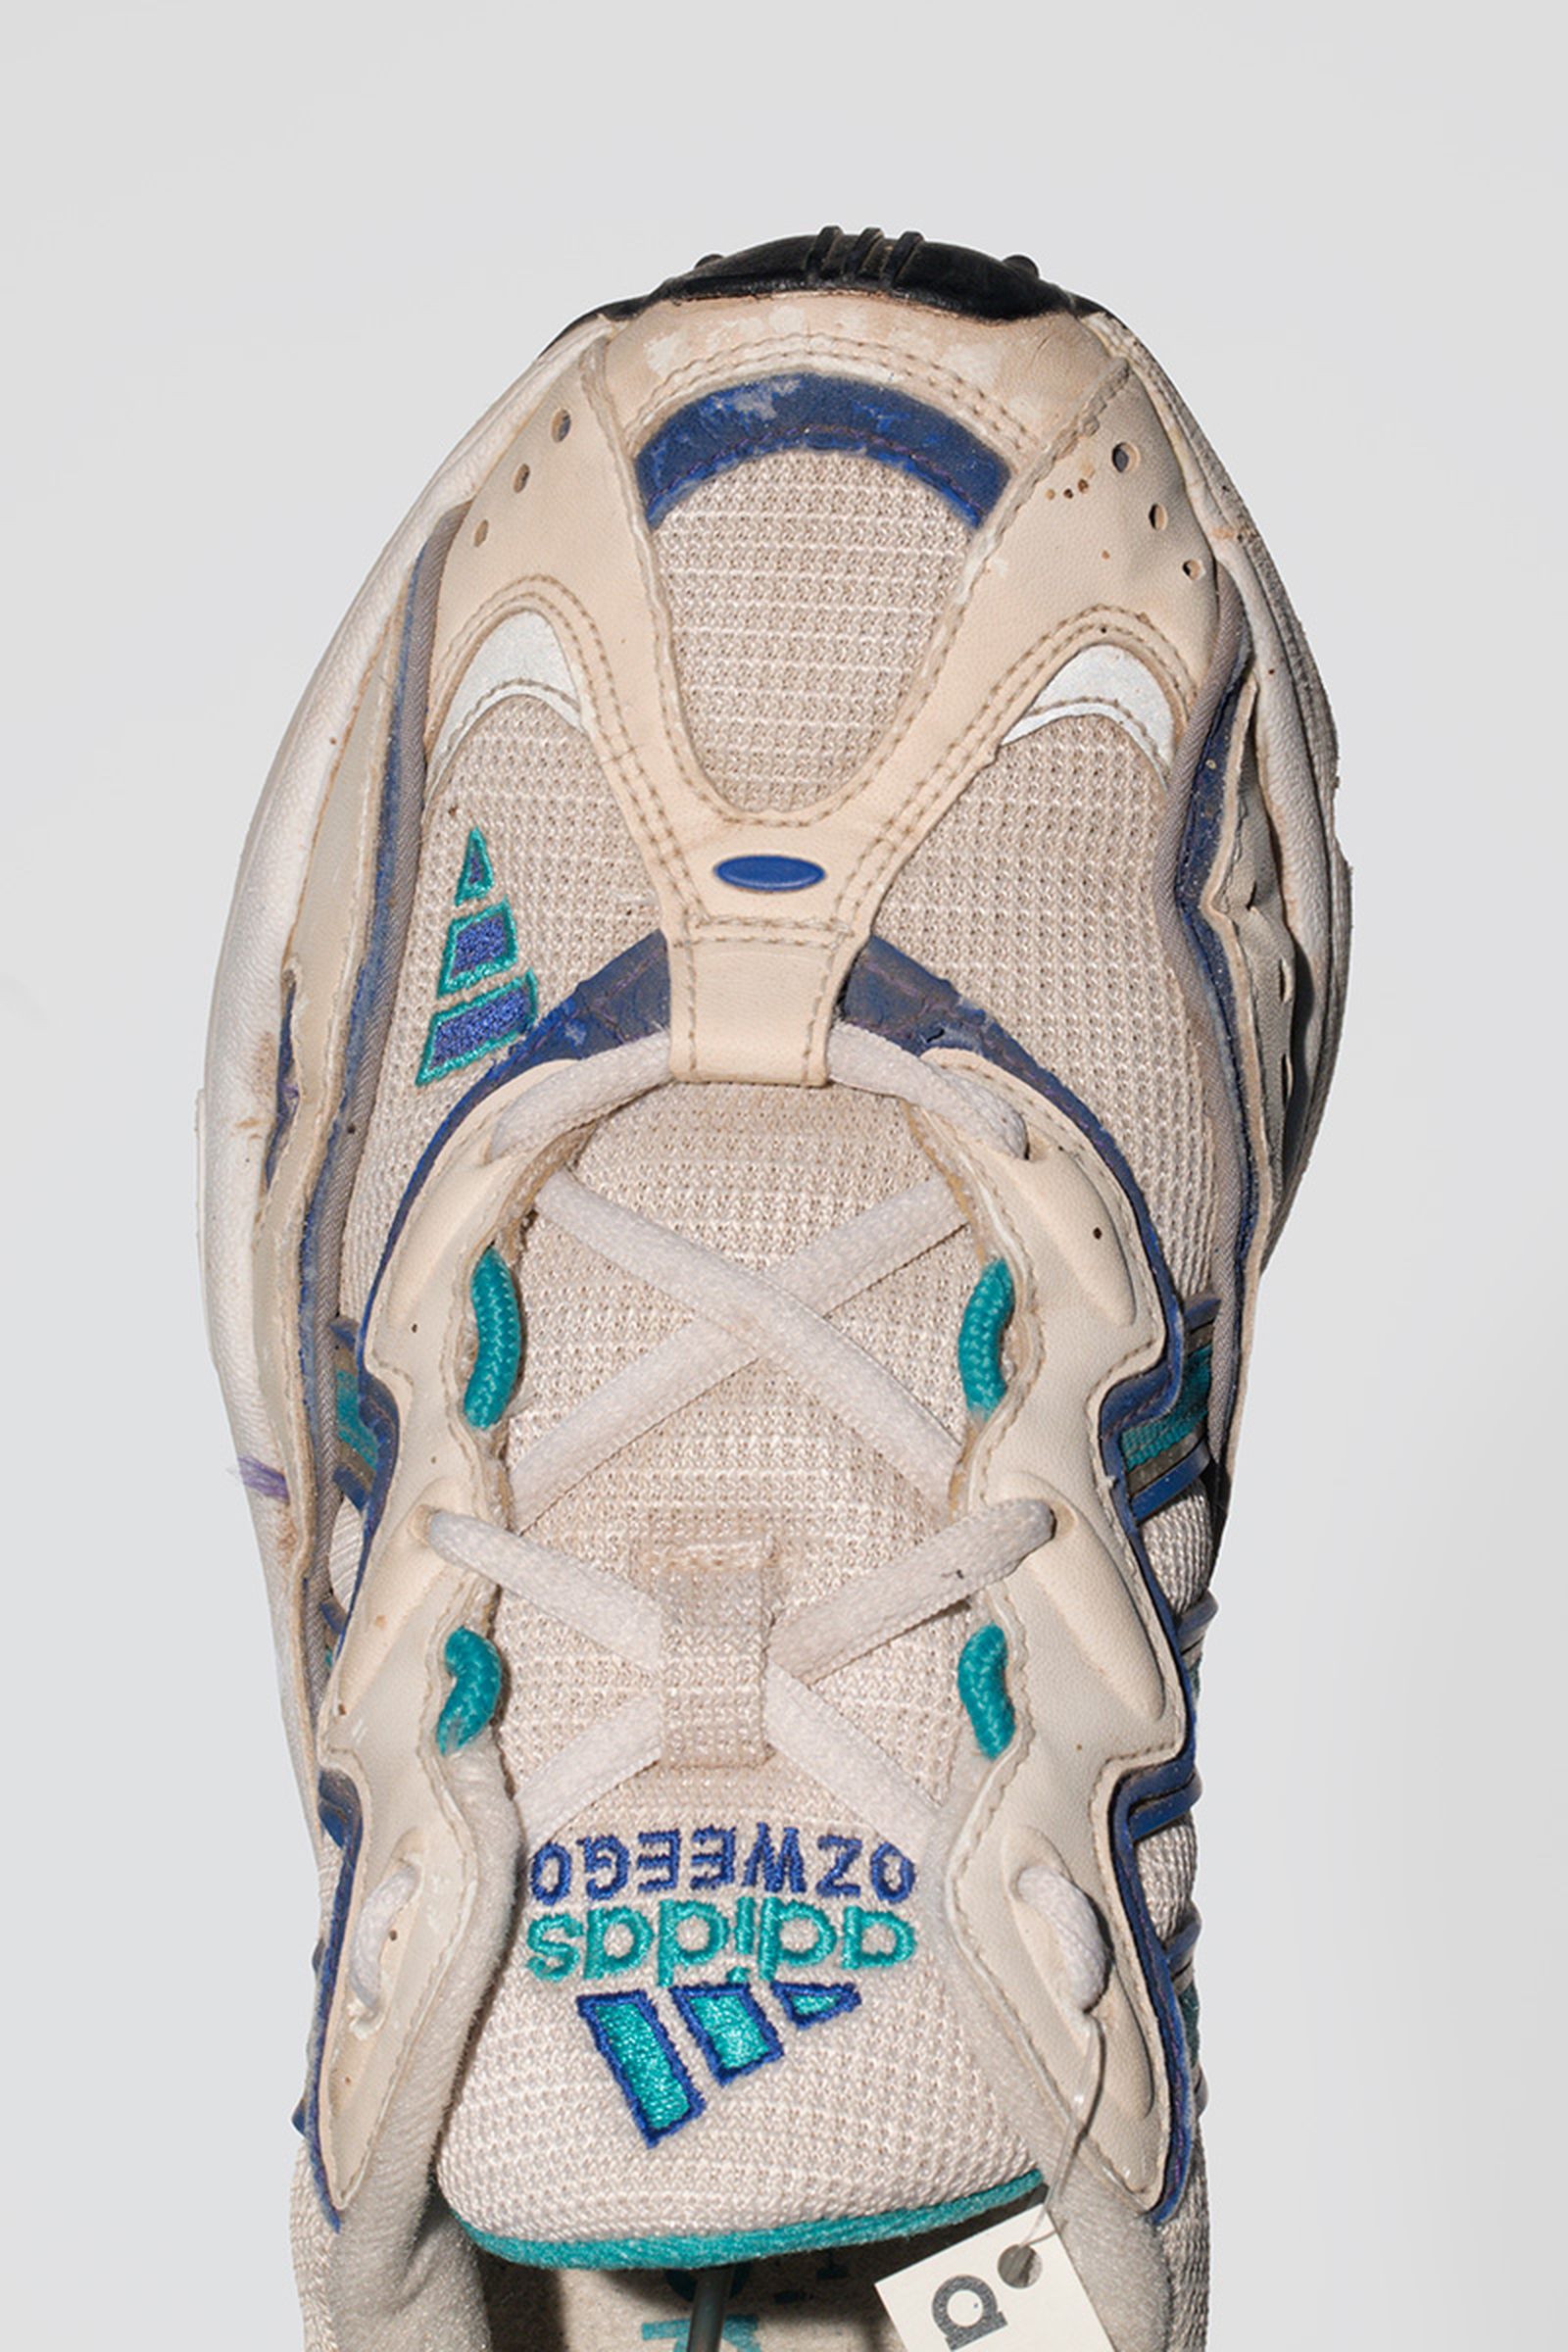 pulse Permeability Funnel web spider Here's How the adidas Ozweego Evolved From 1996 to 2019